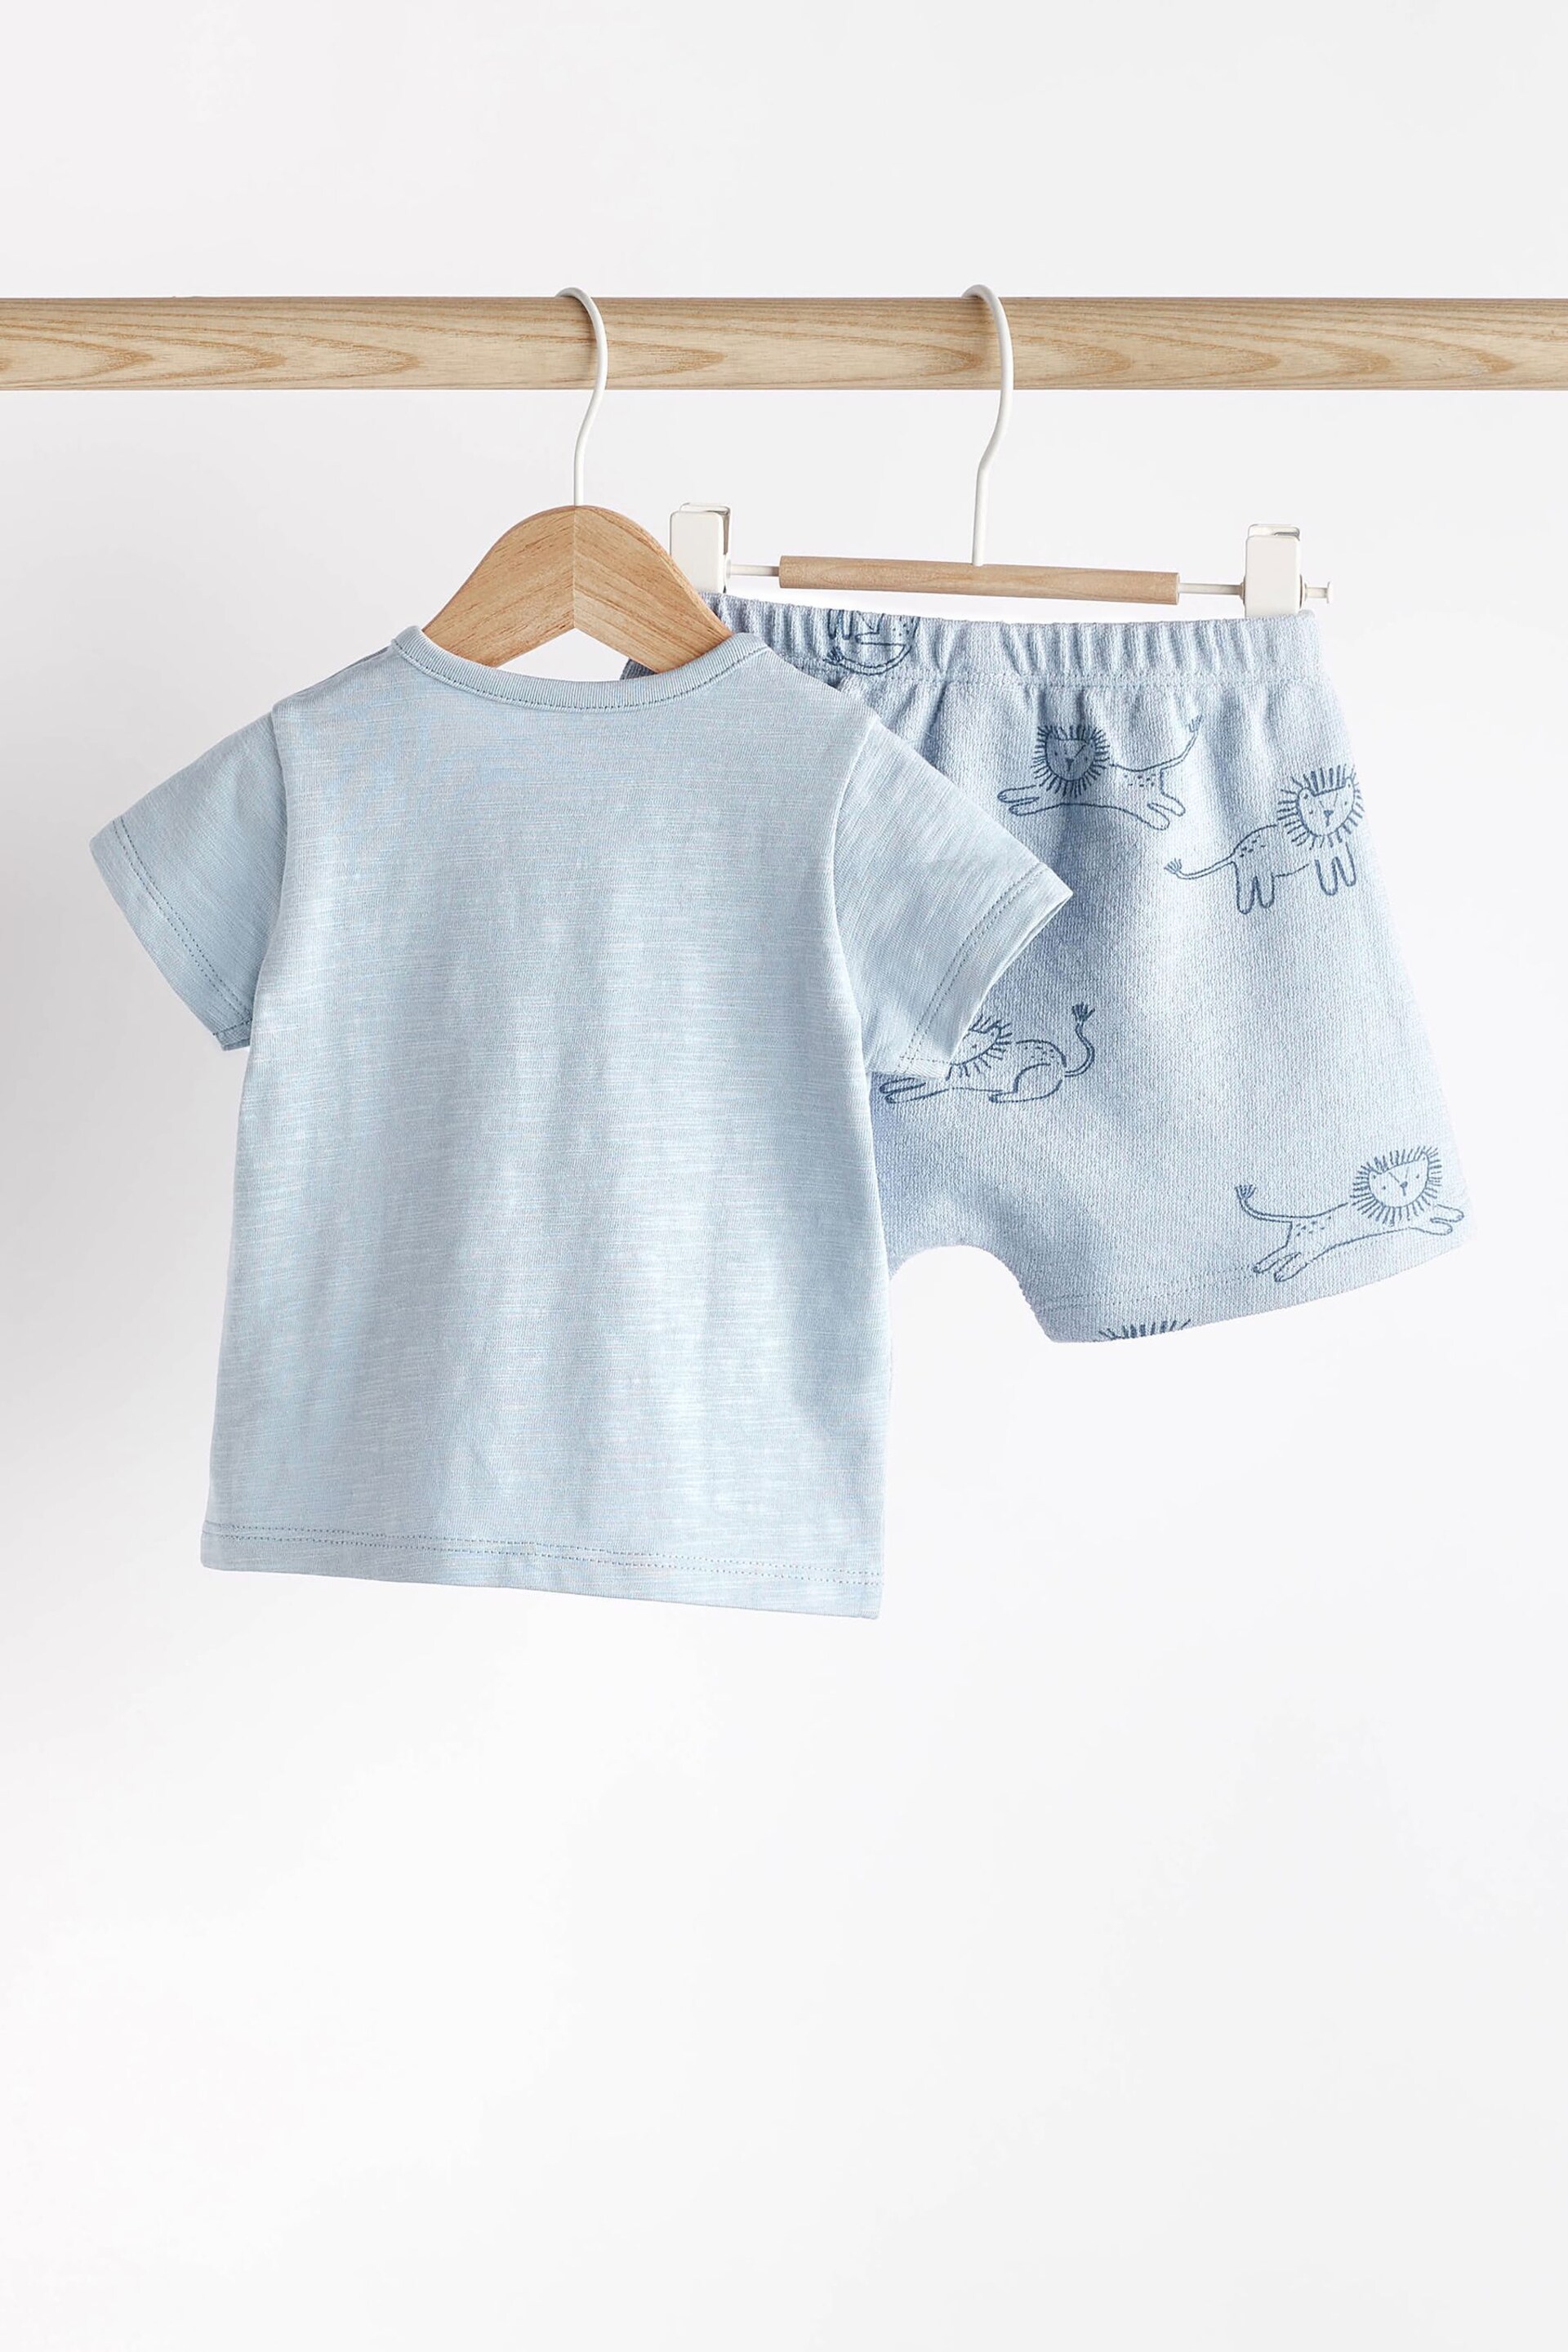 Teal Blue Lion Baby T-Shirt And Shorts 2 Piece Set - Image 5 of 13